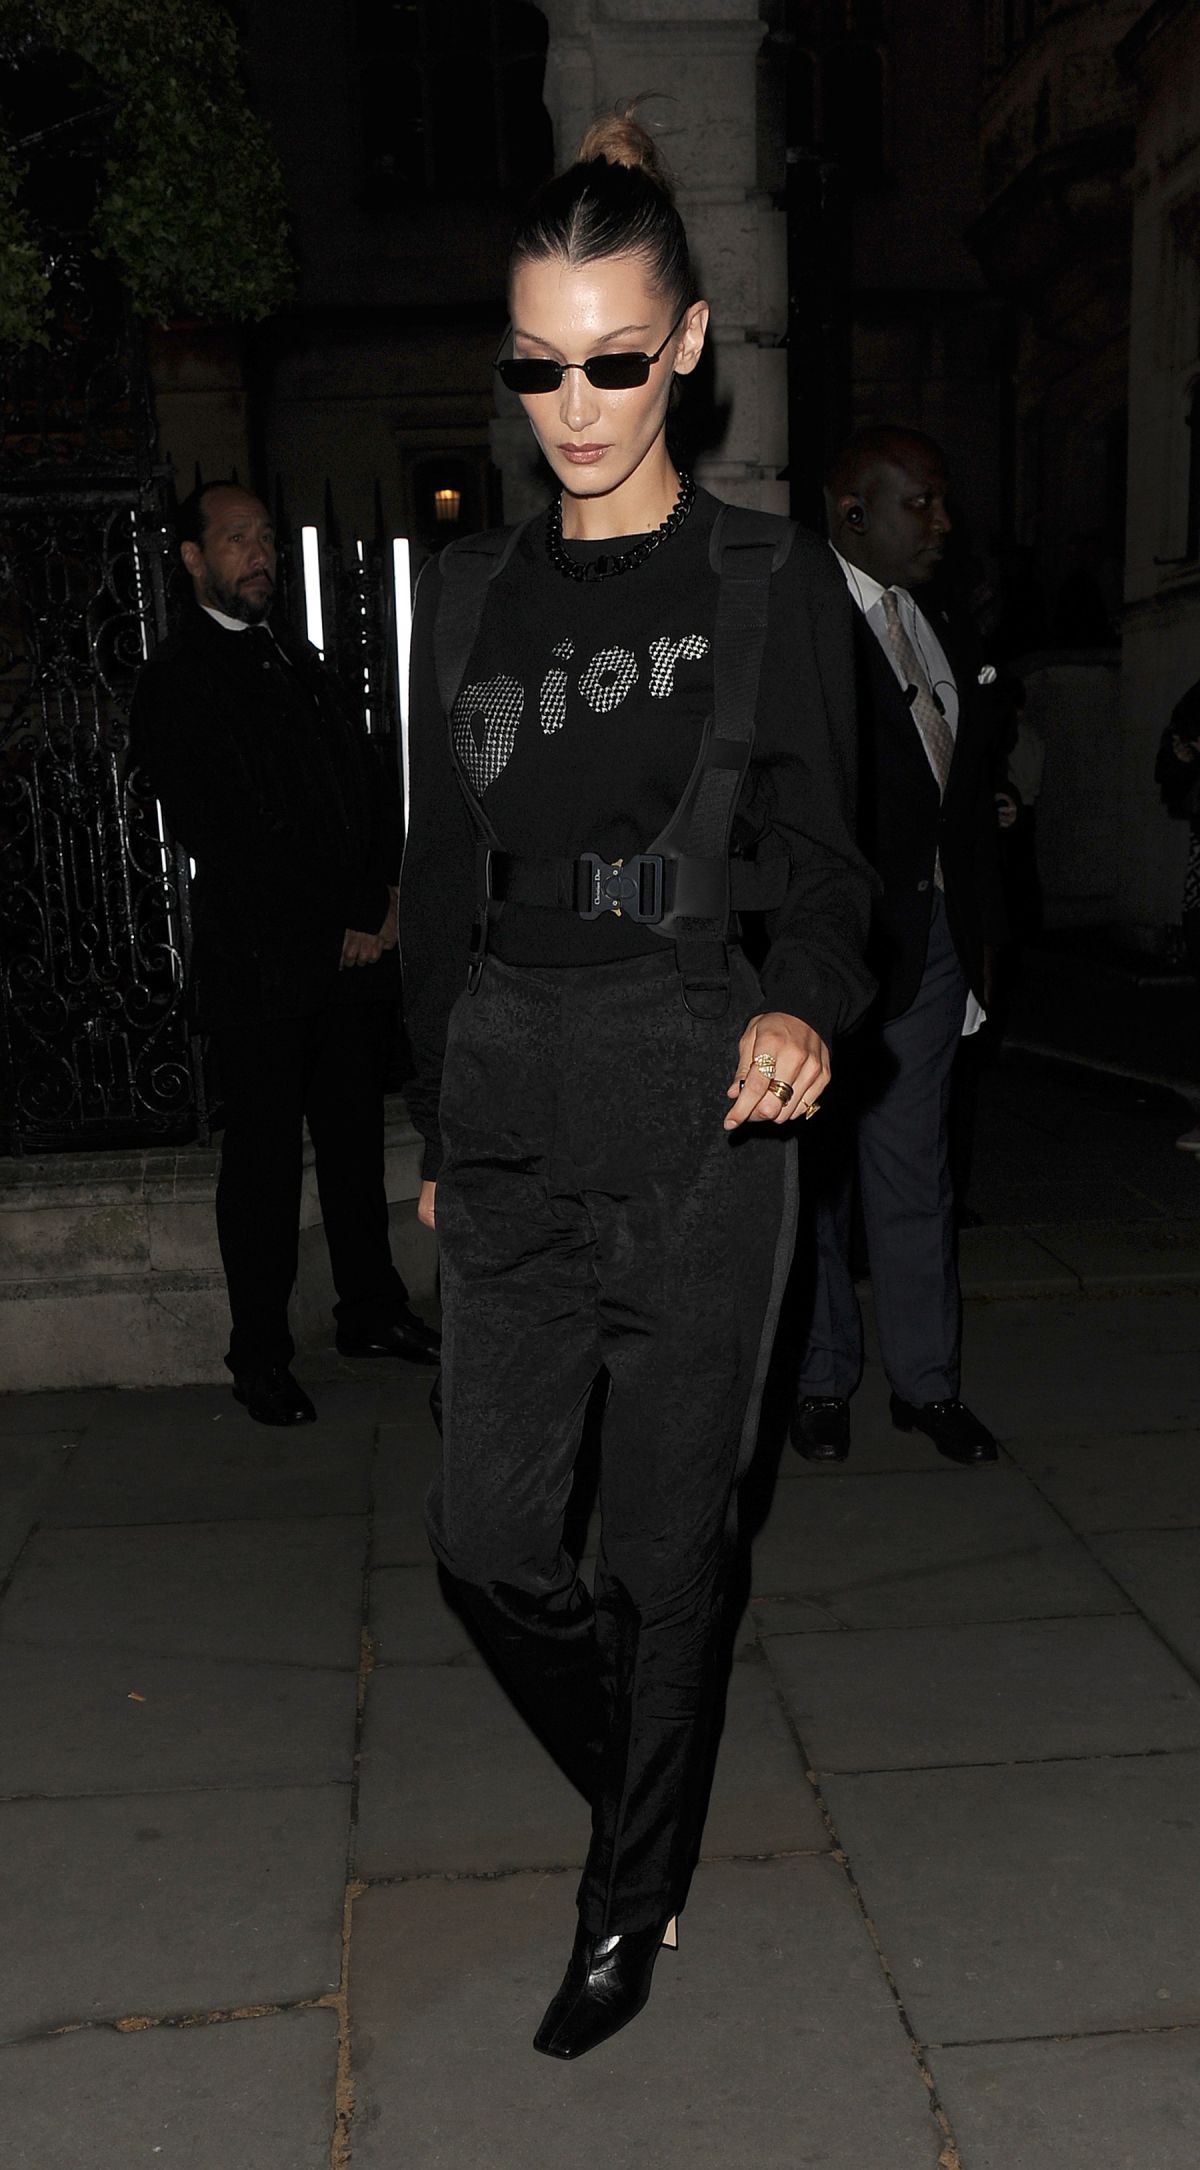 BELLA HADID at Christian Dior Party in London 05/29/2019 – HawtCelebs